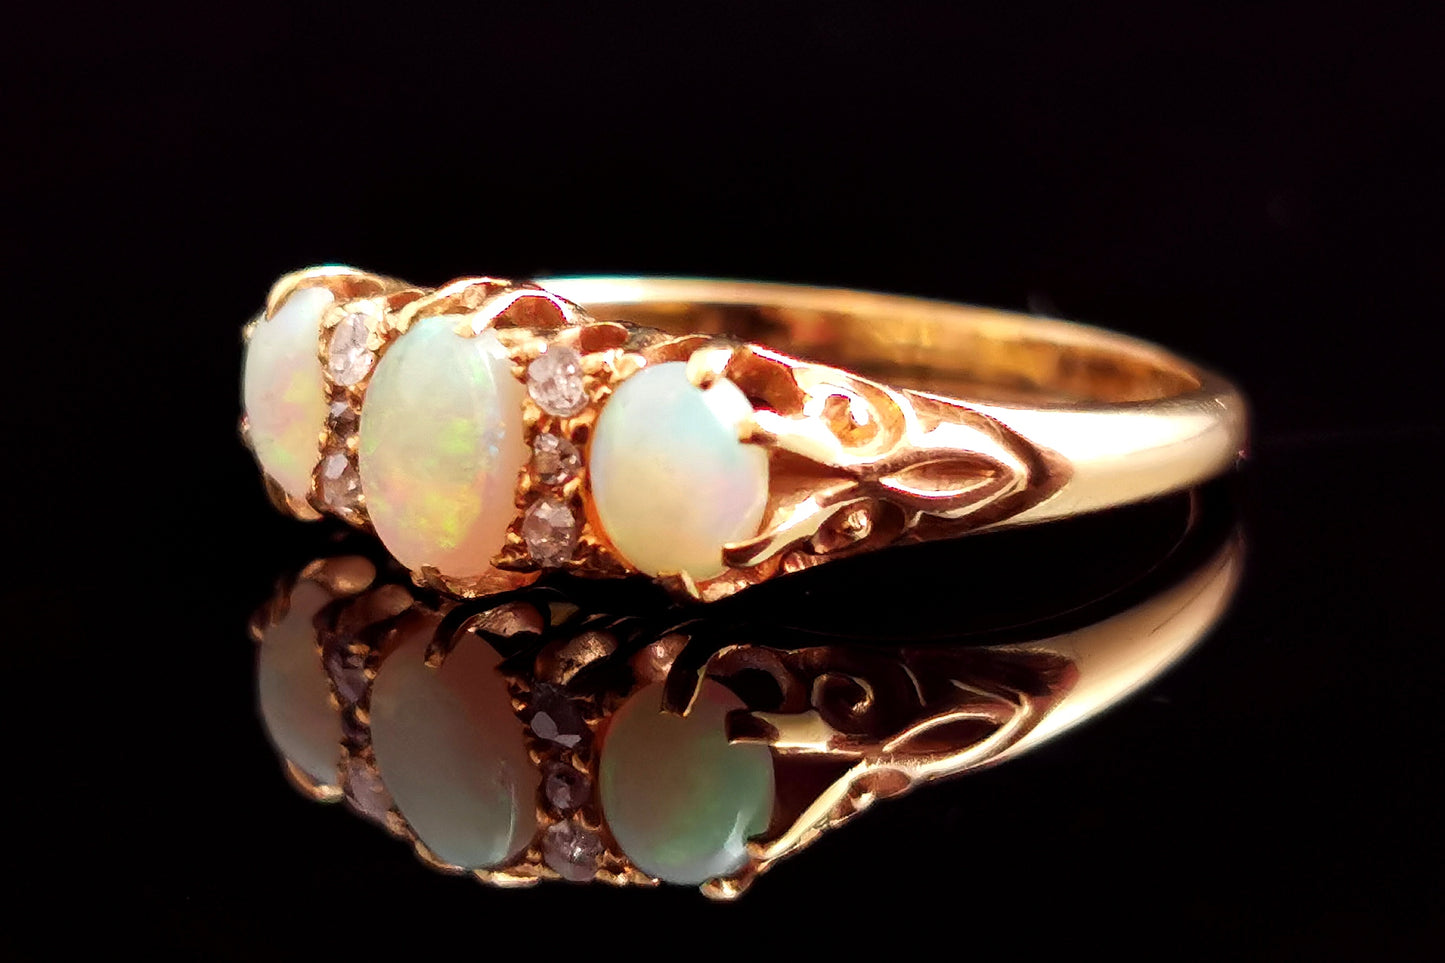 Antique Opal and diamond ring, 18ct gold, Edwardian